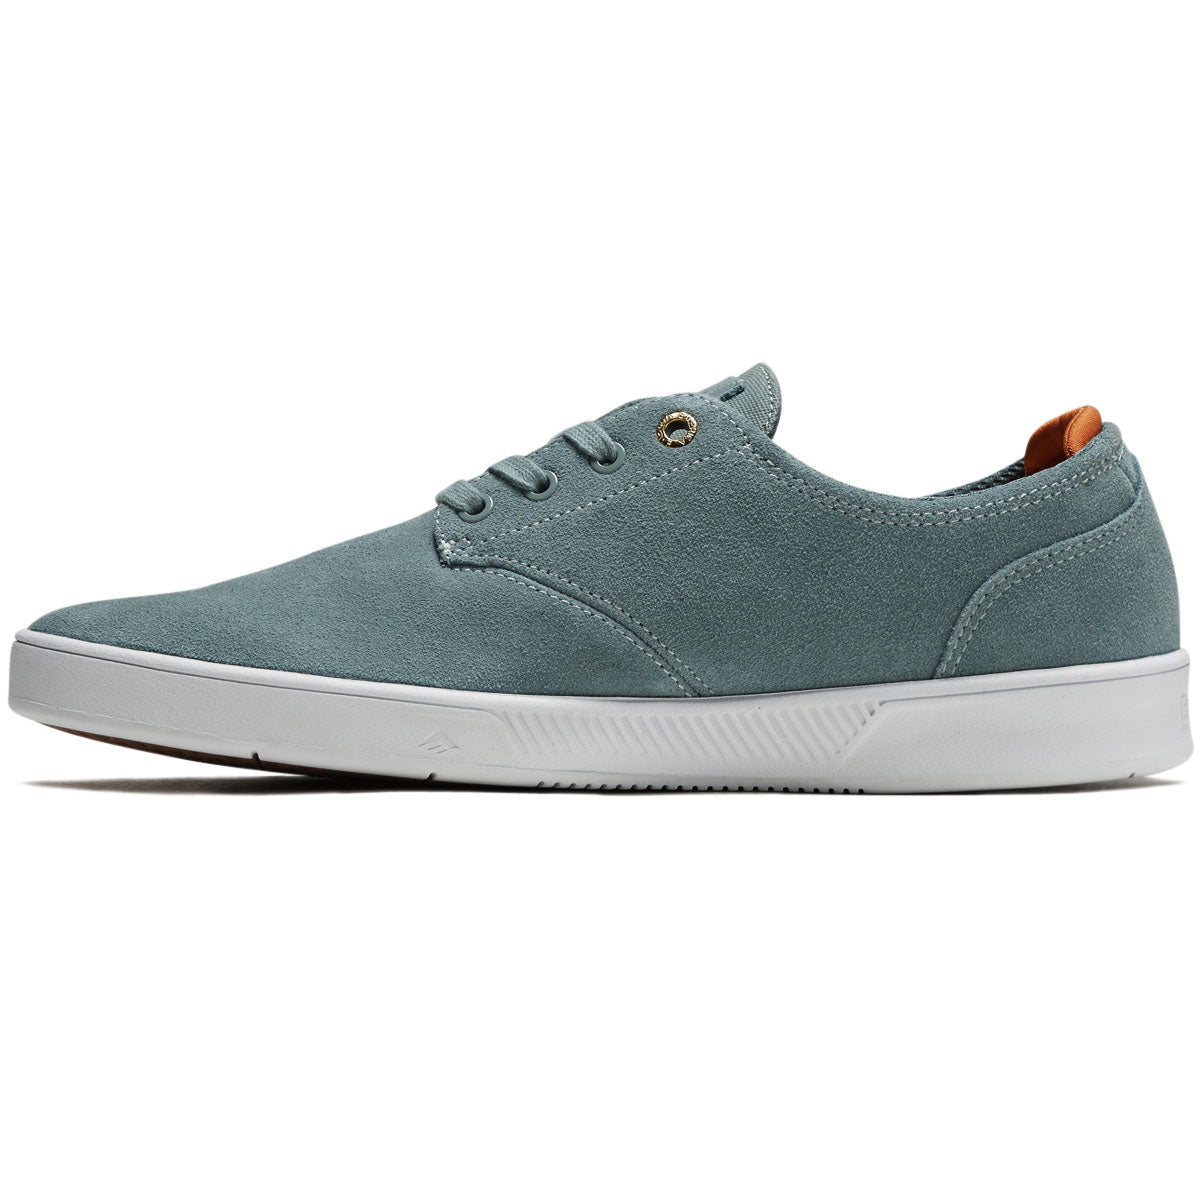 Emerica Romero Laced Shoes - Dusty Blue image 2